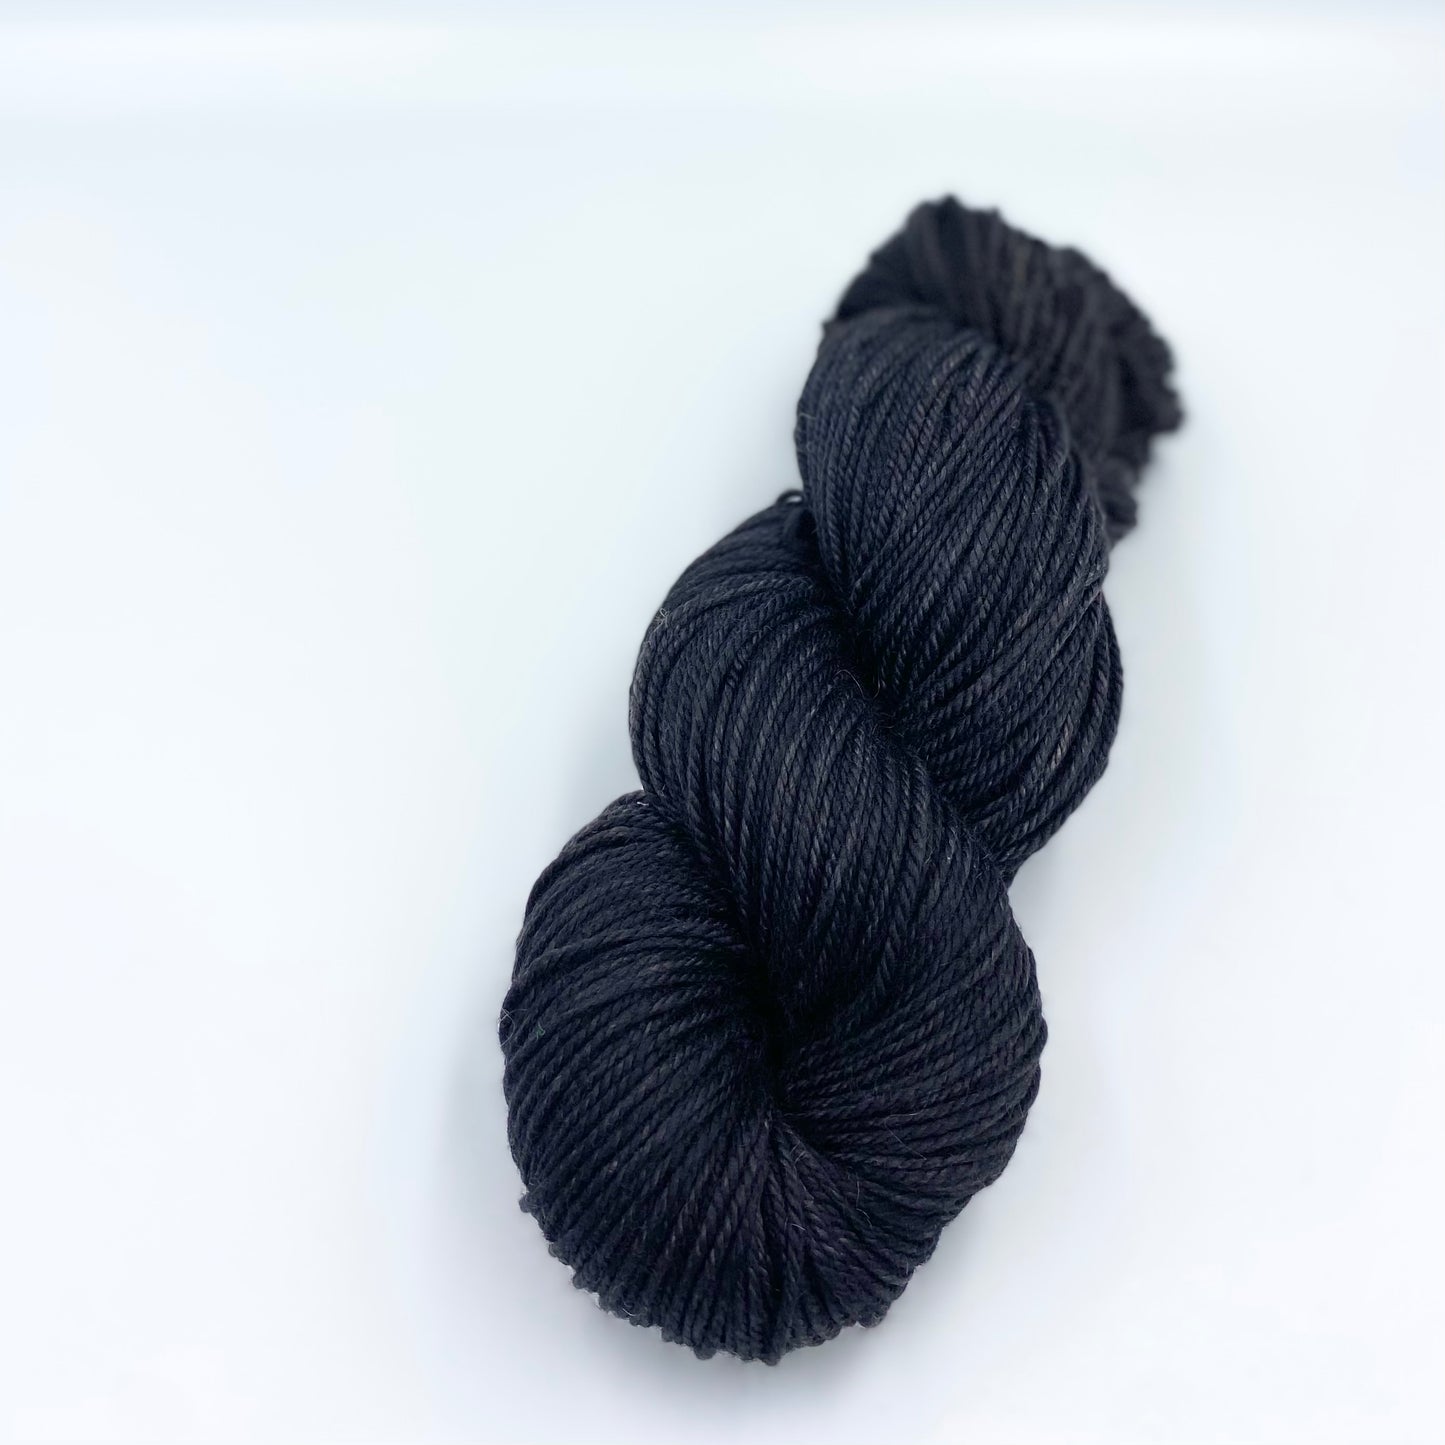 Skein of superwash merino yarn hand dyed in a navy color